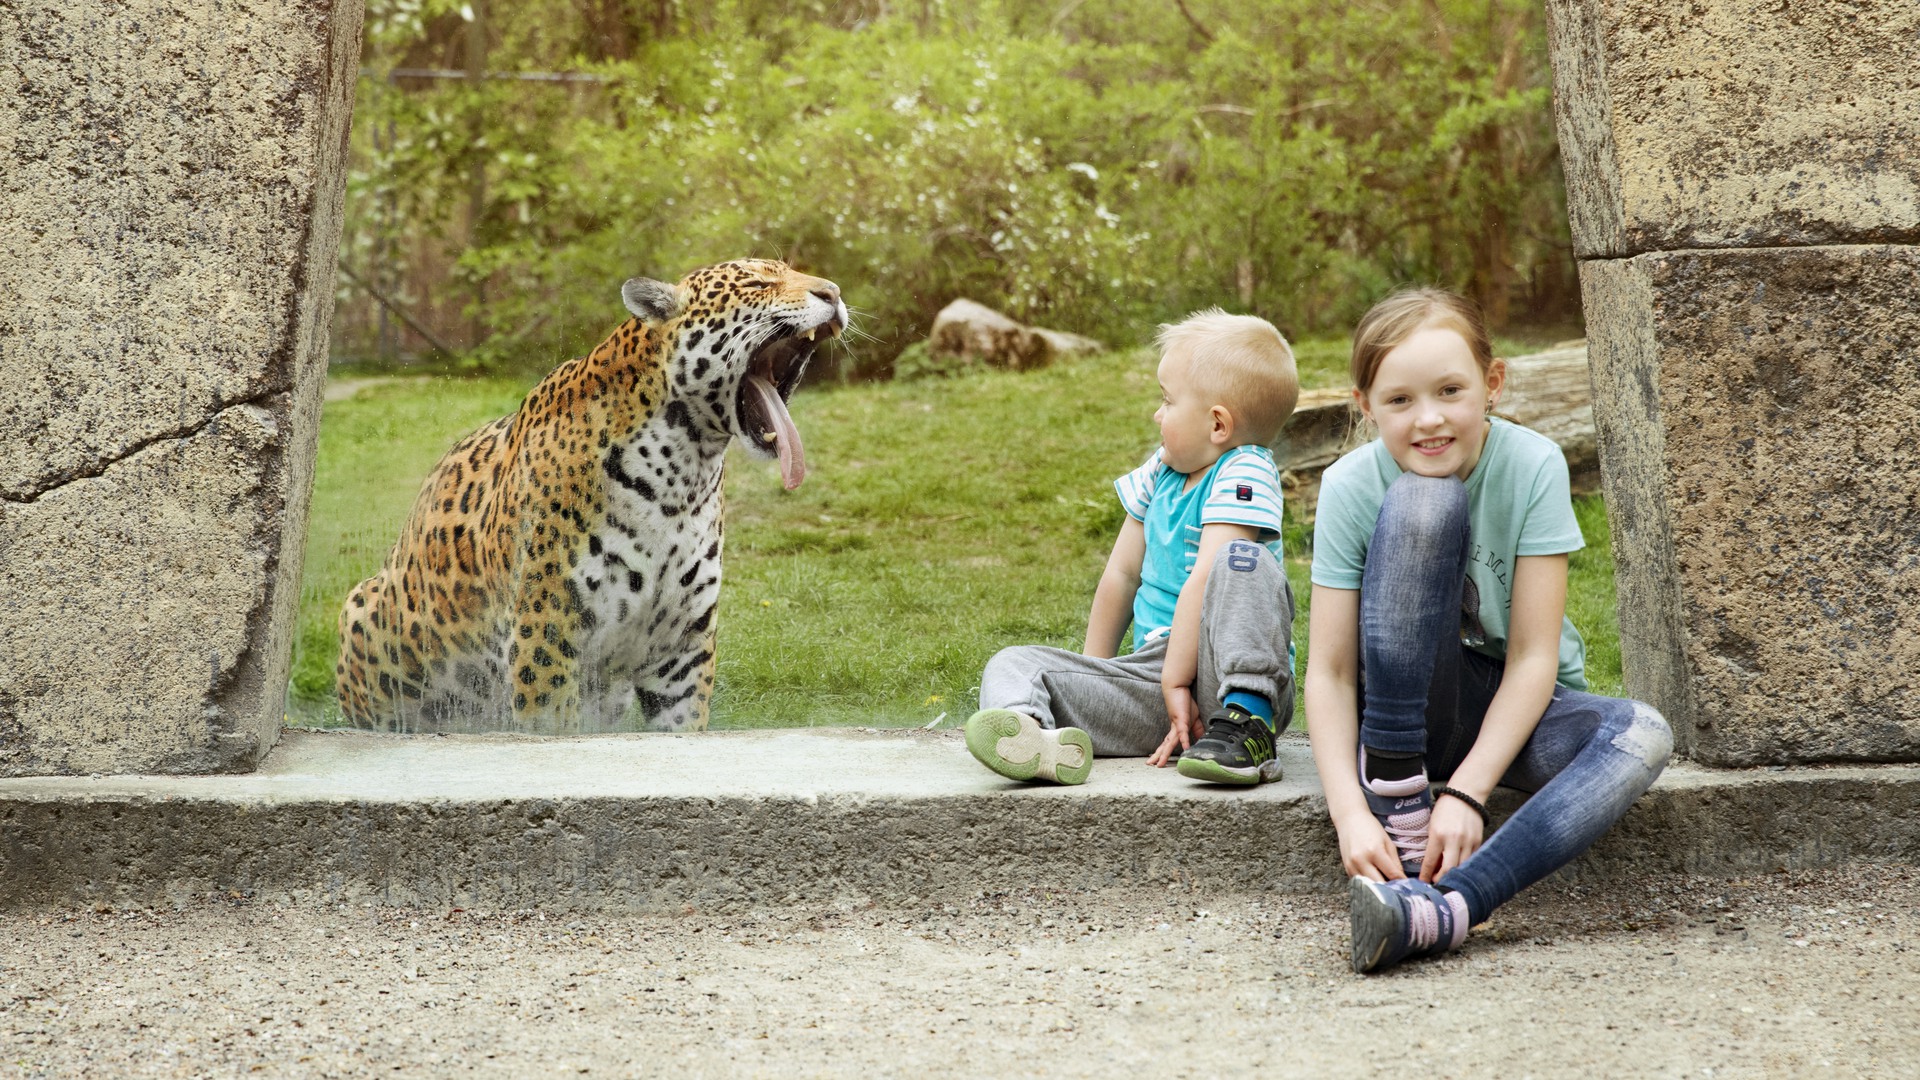 A roaring lepard, and two kids